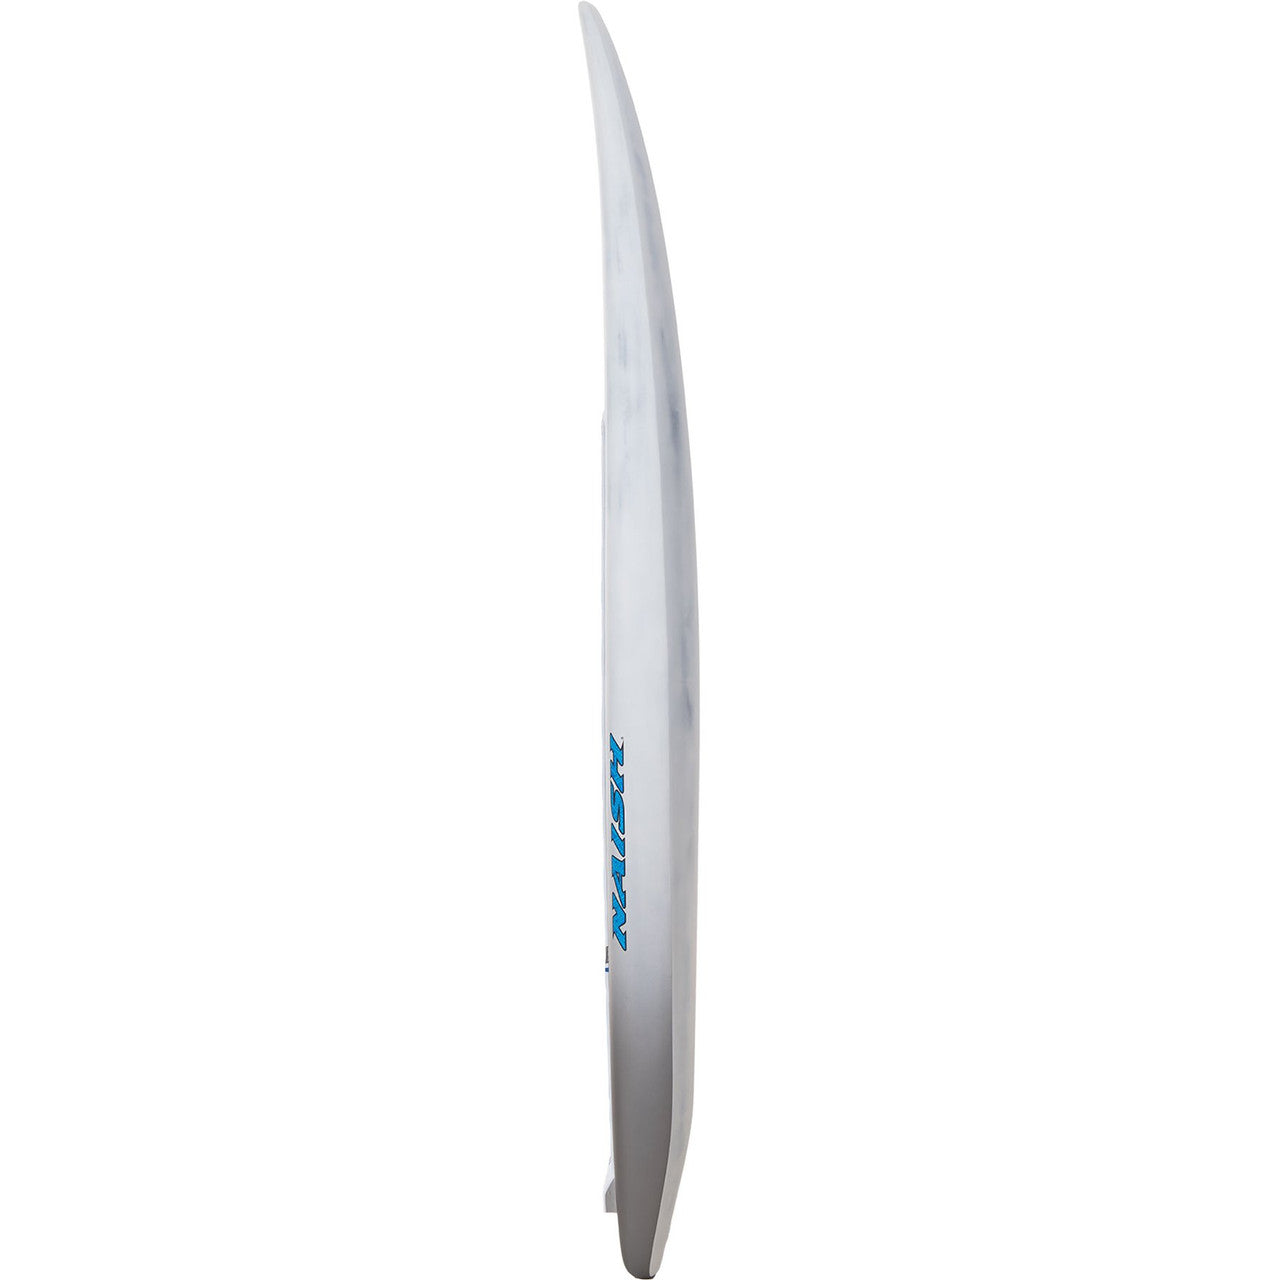 Naish Hover Wing Foil Carbon Ultra Wing-Surfing/Foil SUP 95 Liter